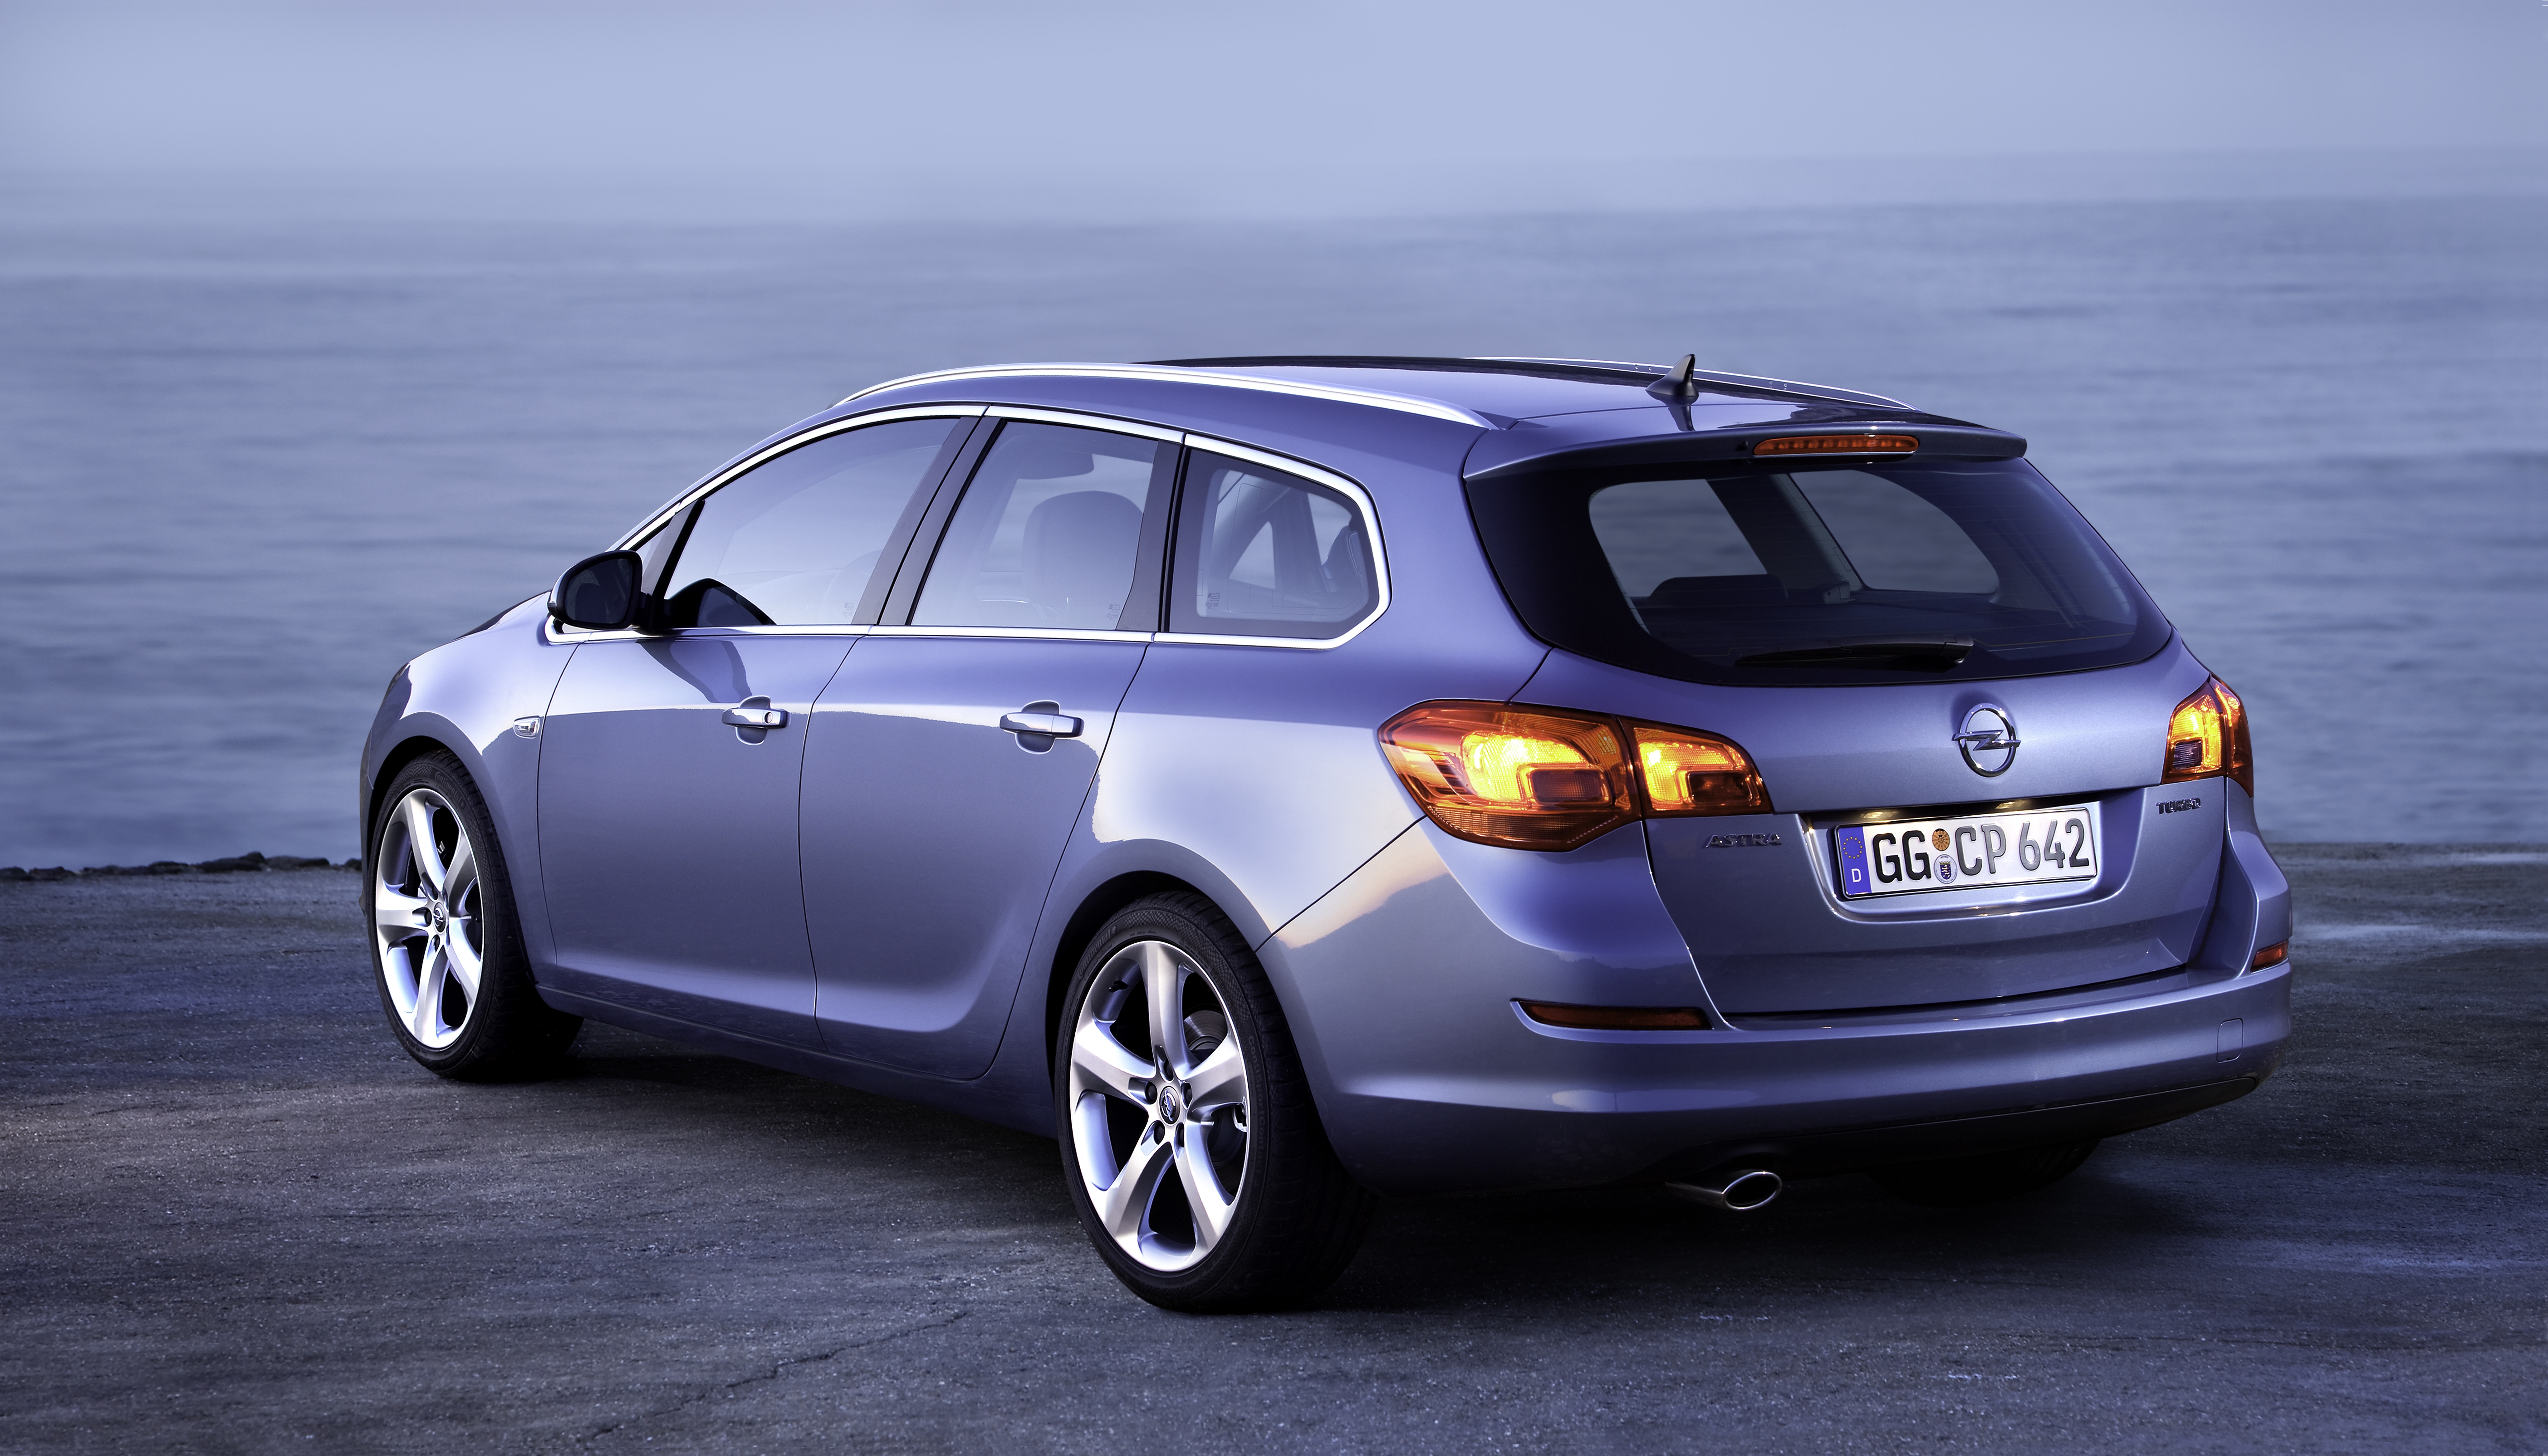 Opel Astra Sports Tourer exterior specifications